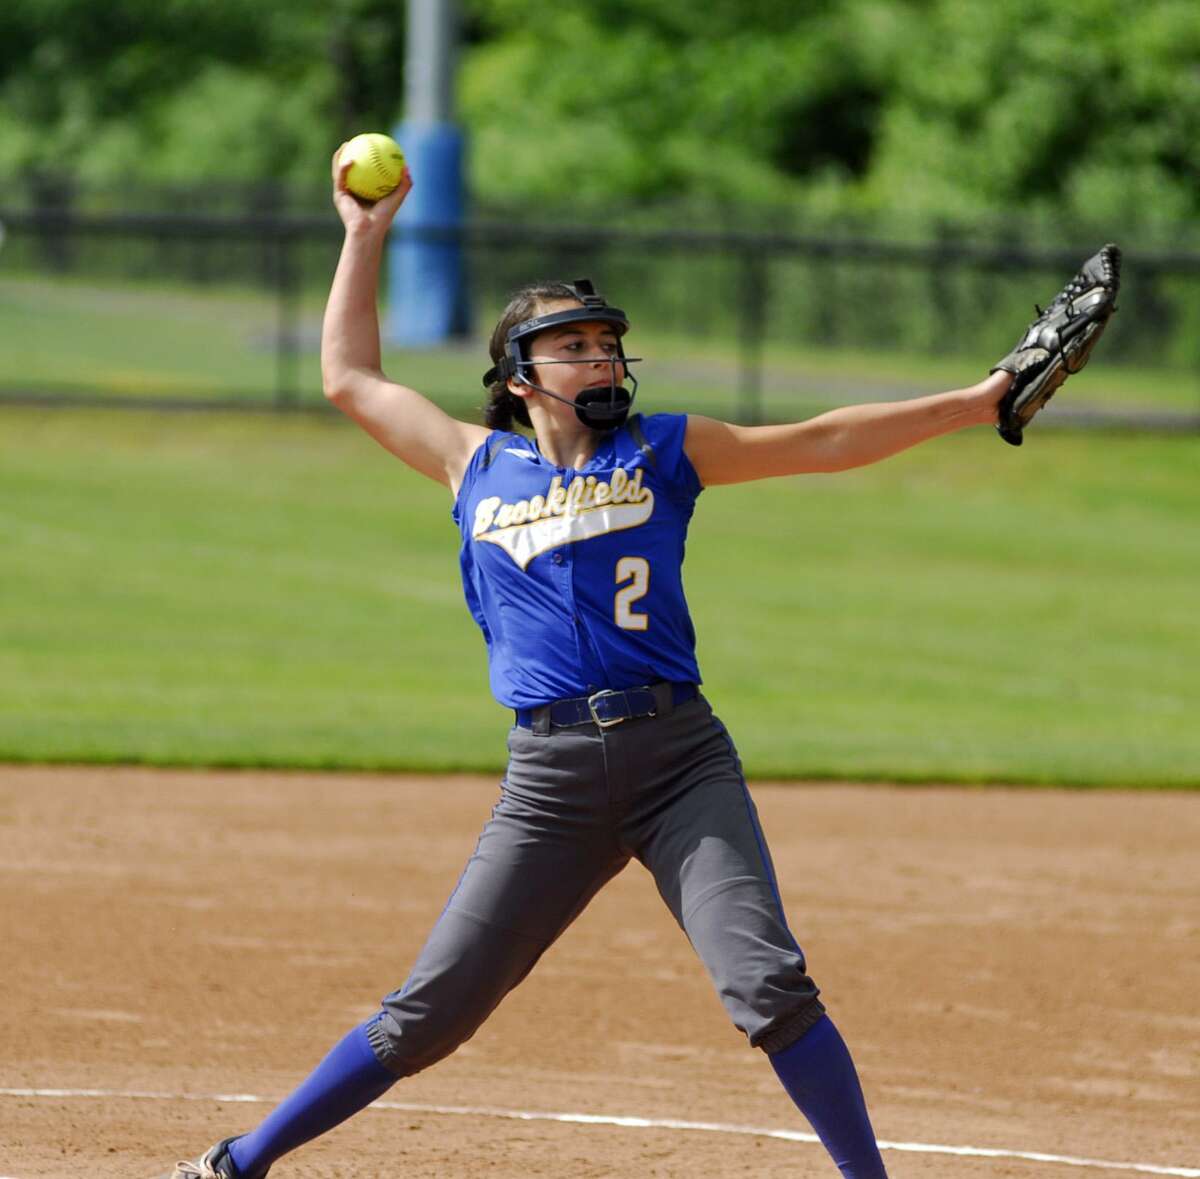 Brookfield’s Alyssa Lionetti throws a pitch during a game against Lyman Hall on Friday.